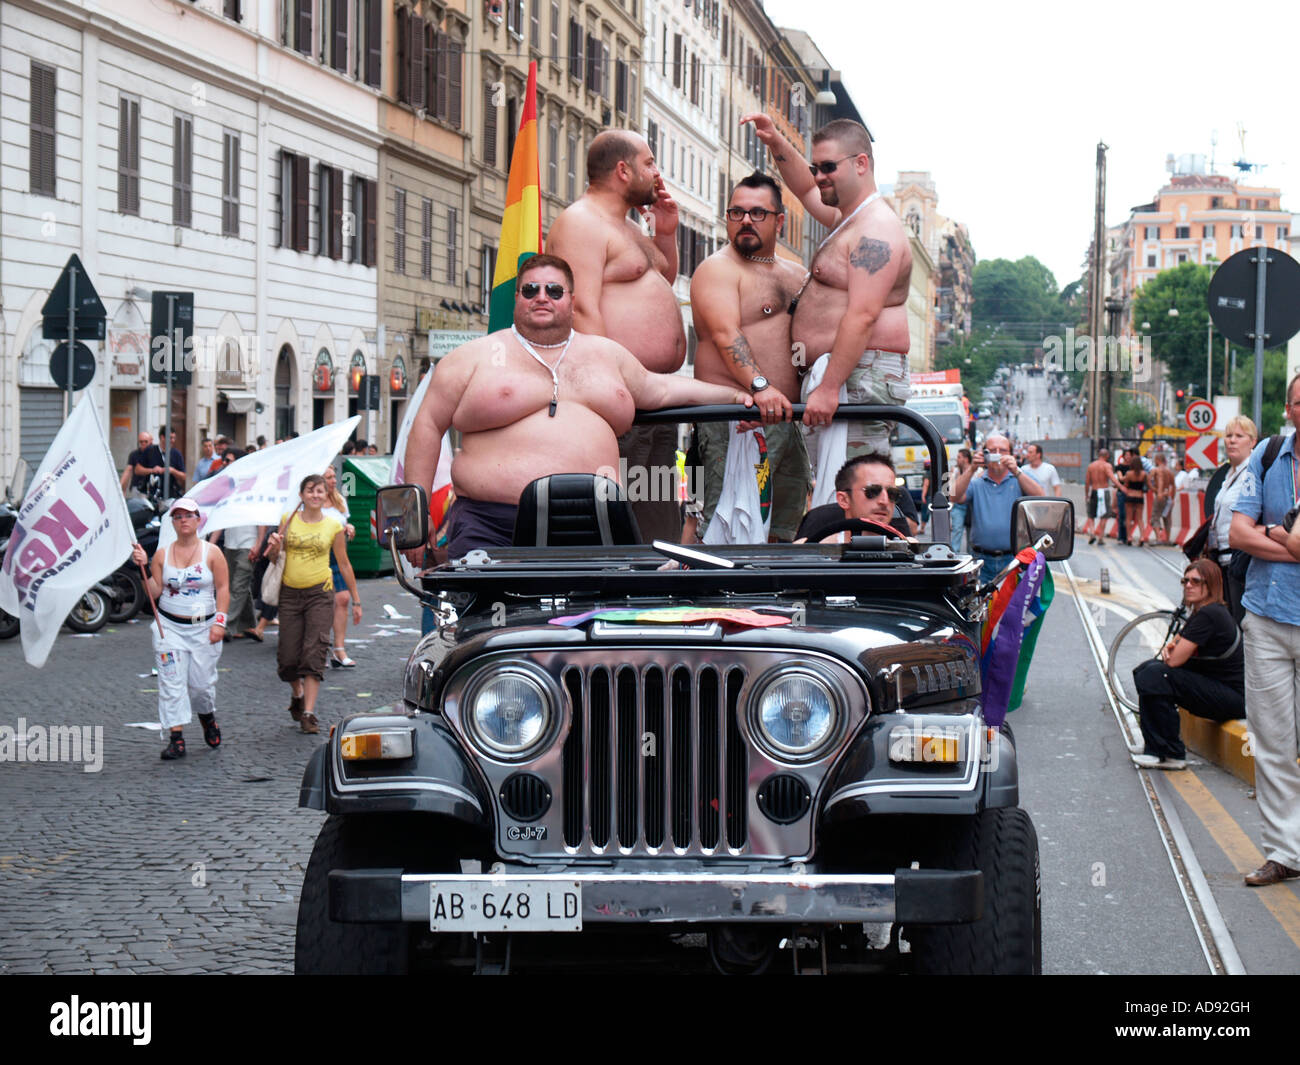 overweight-gay-men-on-jeep-at-gay-pride-rome-2007-AD92GH.jpg